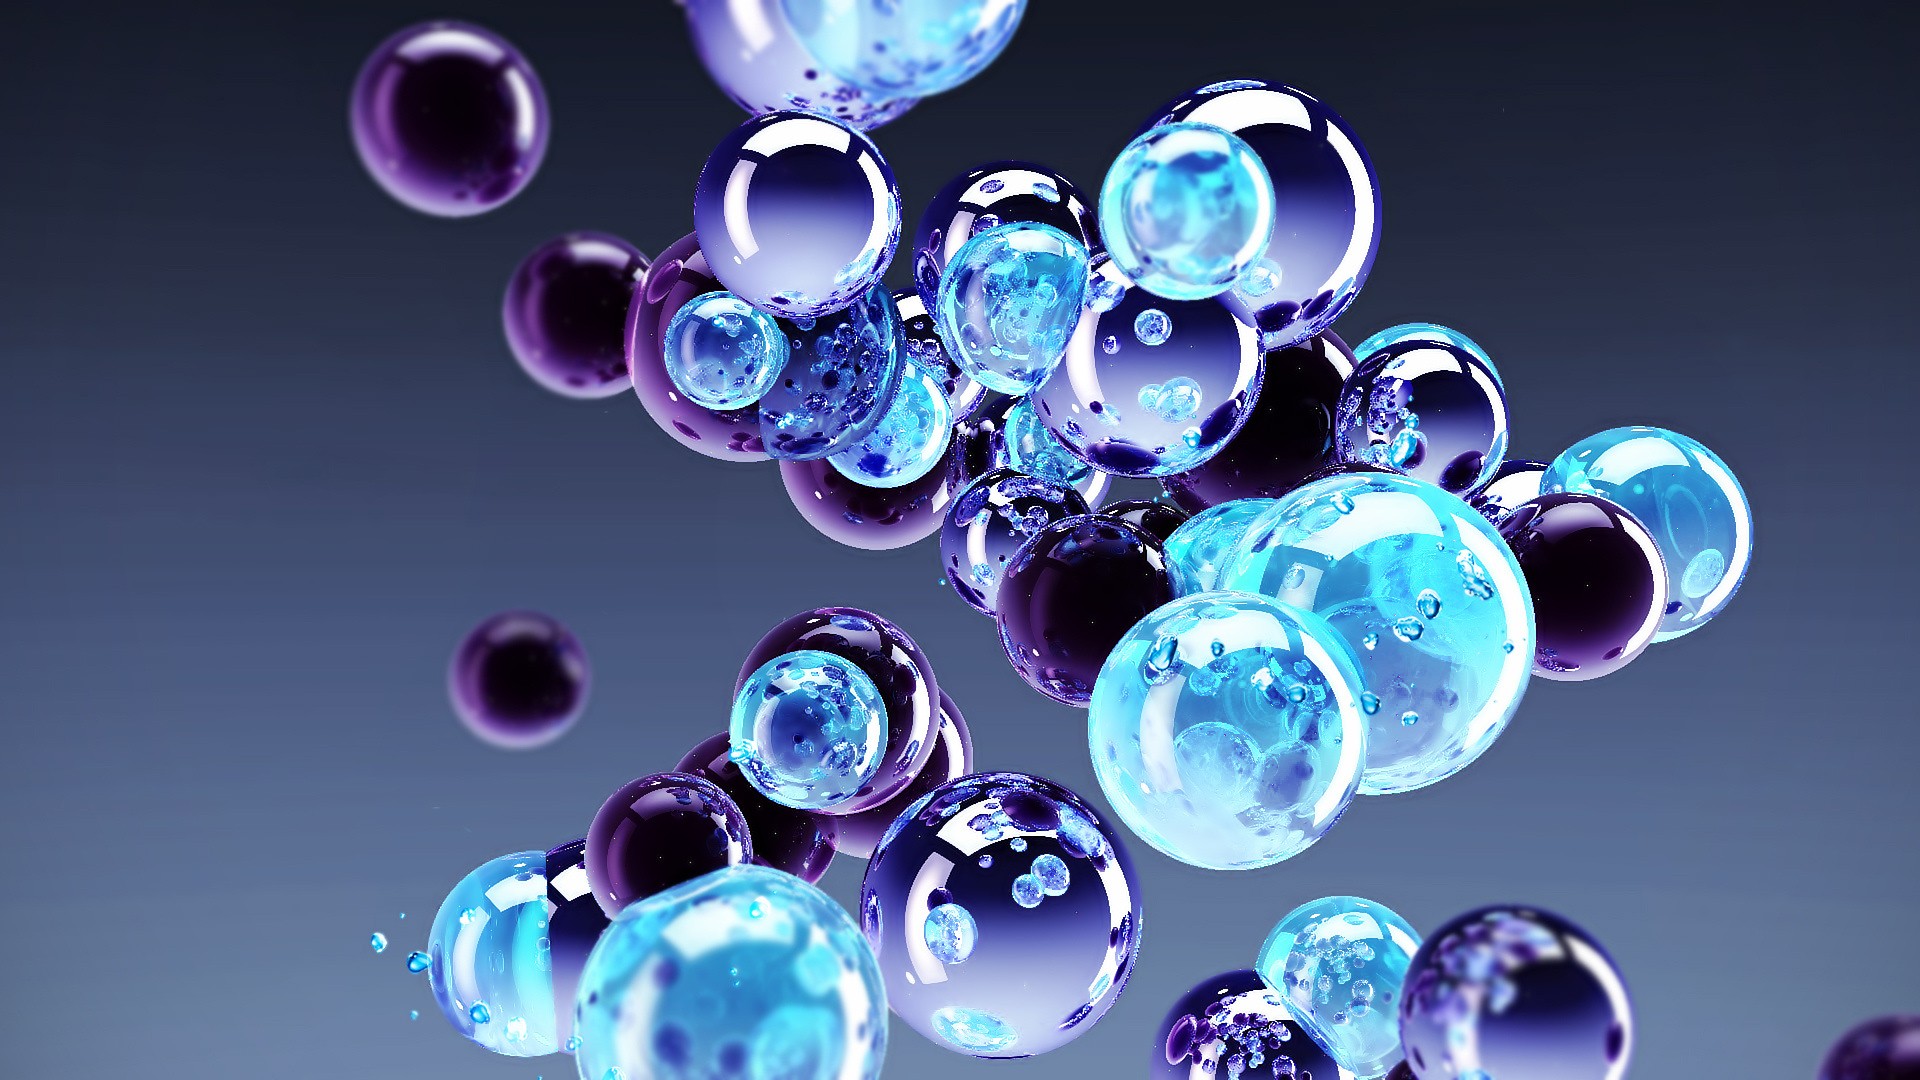 Glass Marbles Full HD Wallpaper and Background Image | 1920x1080 ...